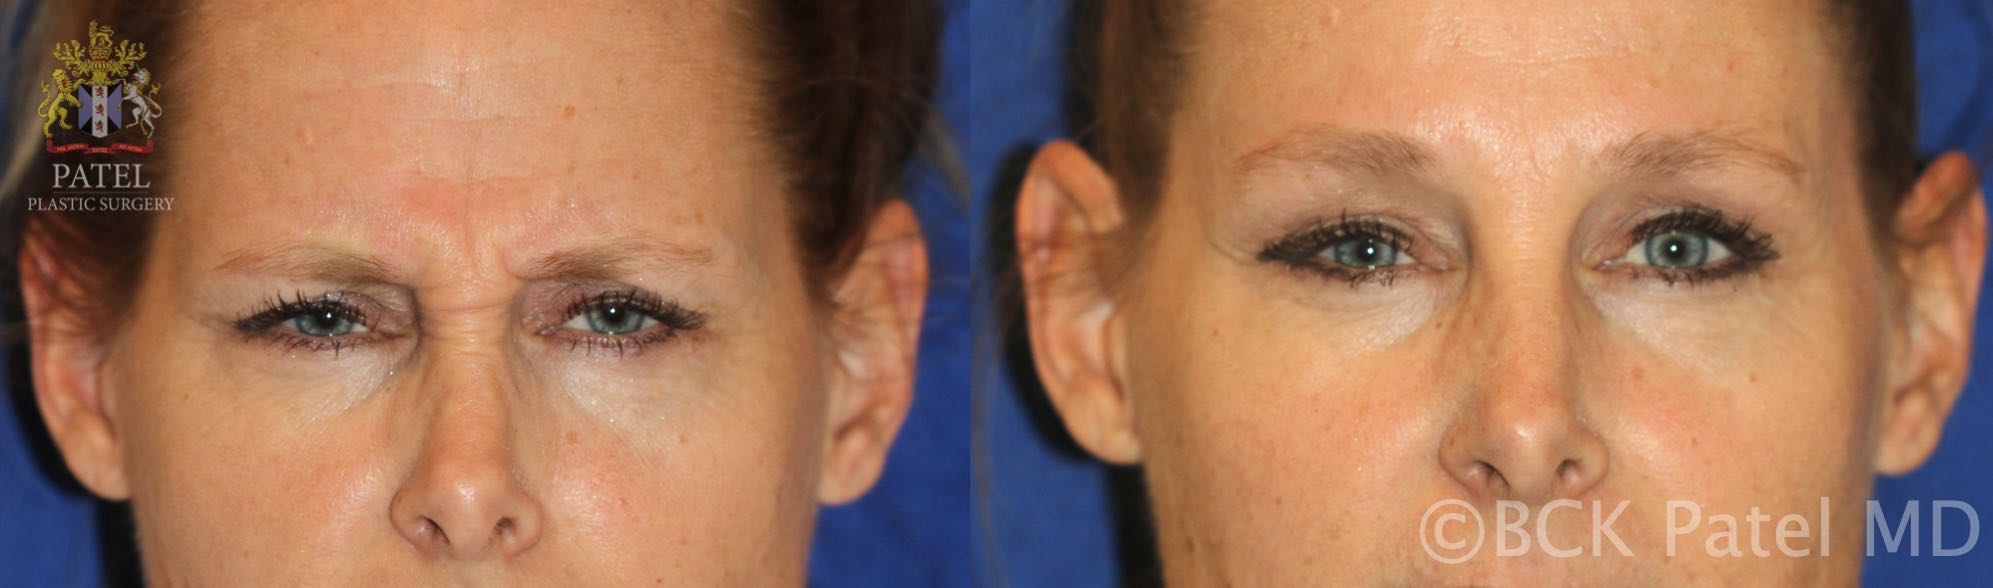 Patient frowning before (left) and after (right) injection with botulinum toxin into the corrugator and procerus muscles. Note the improvement in the shape and height of the brows. By Dr. BCK Patel MD, FRCS